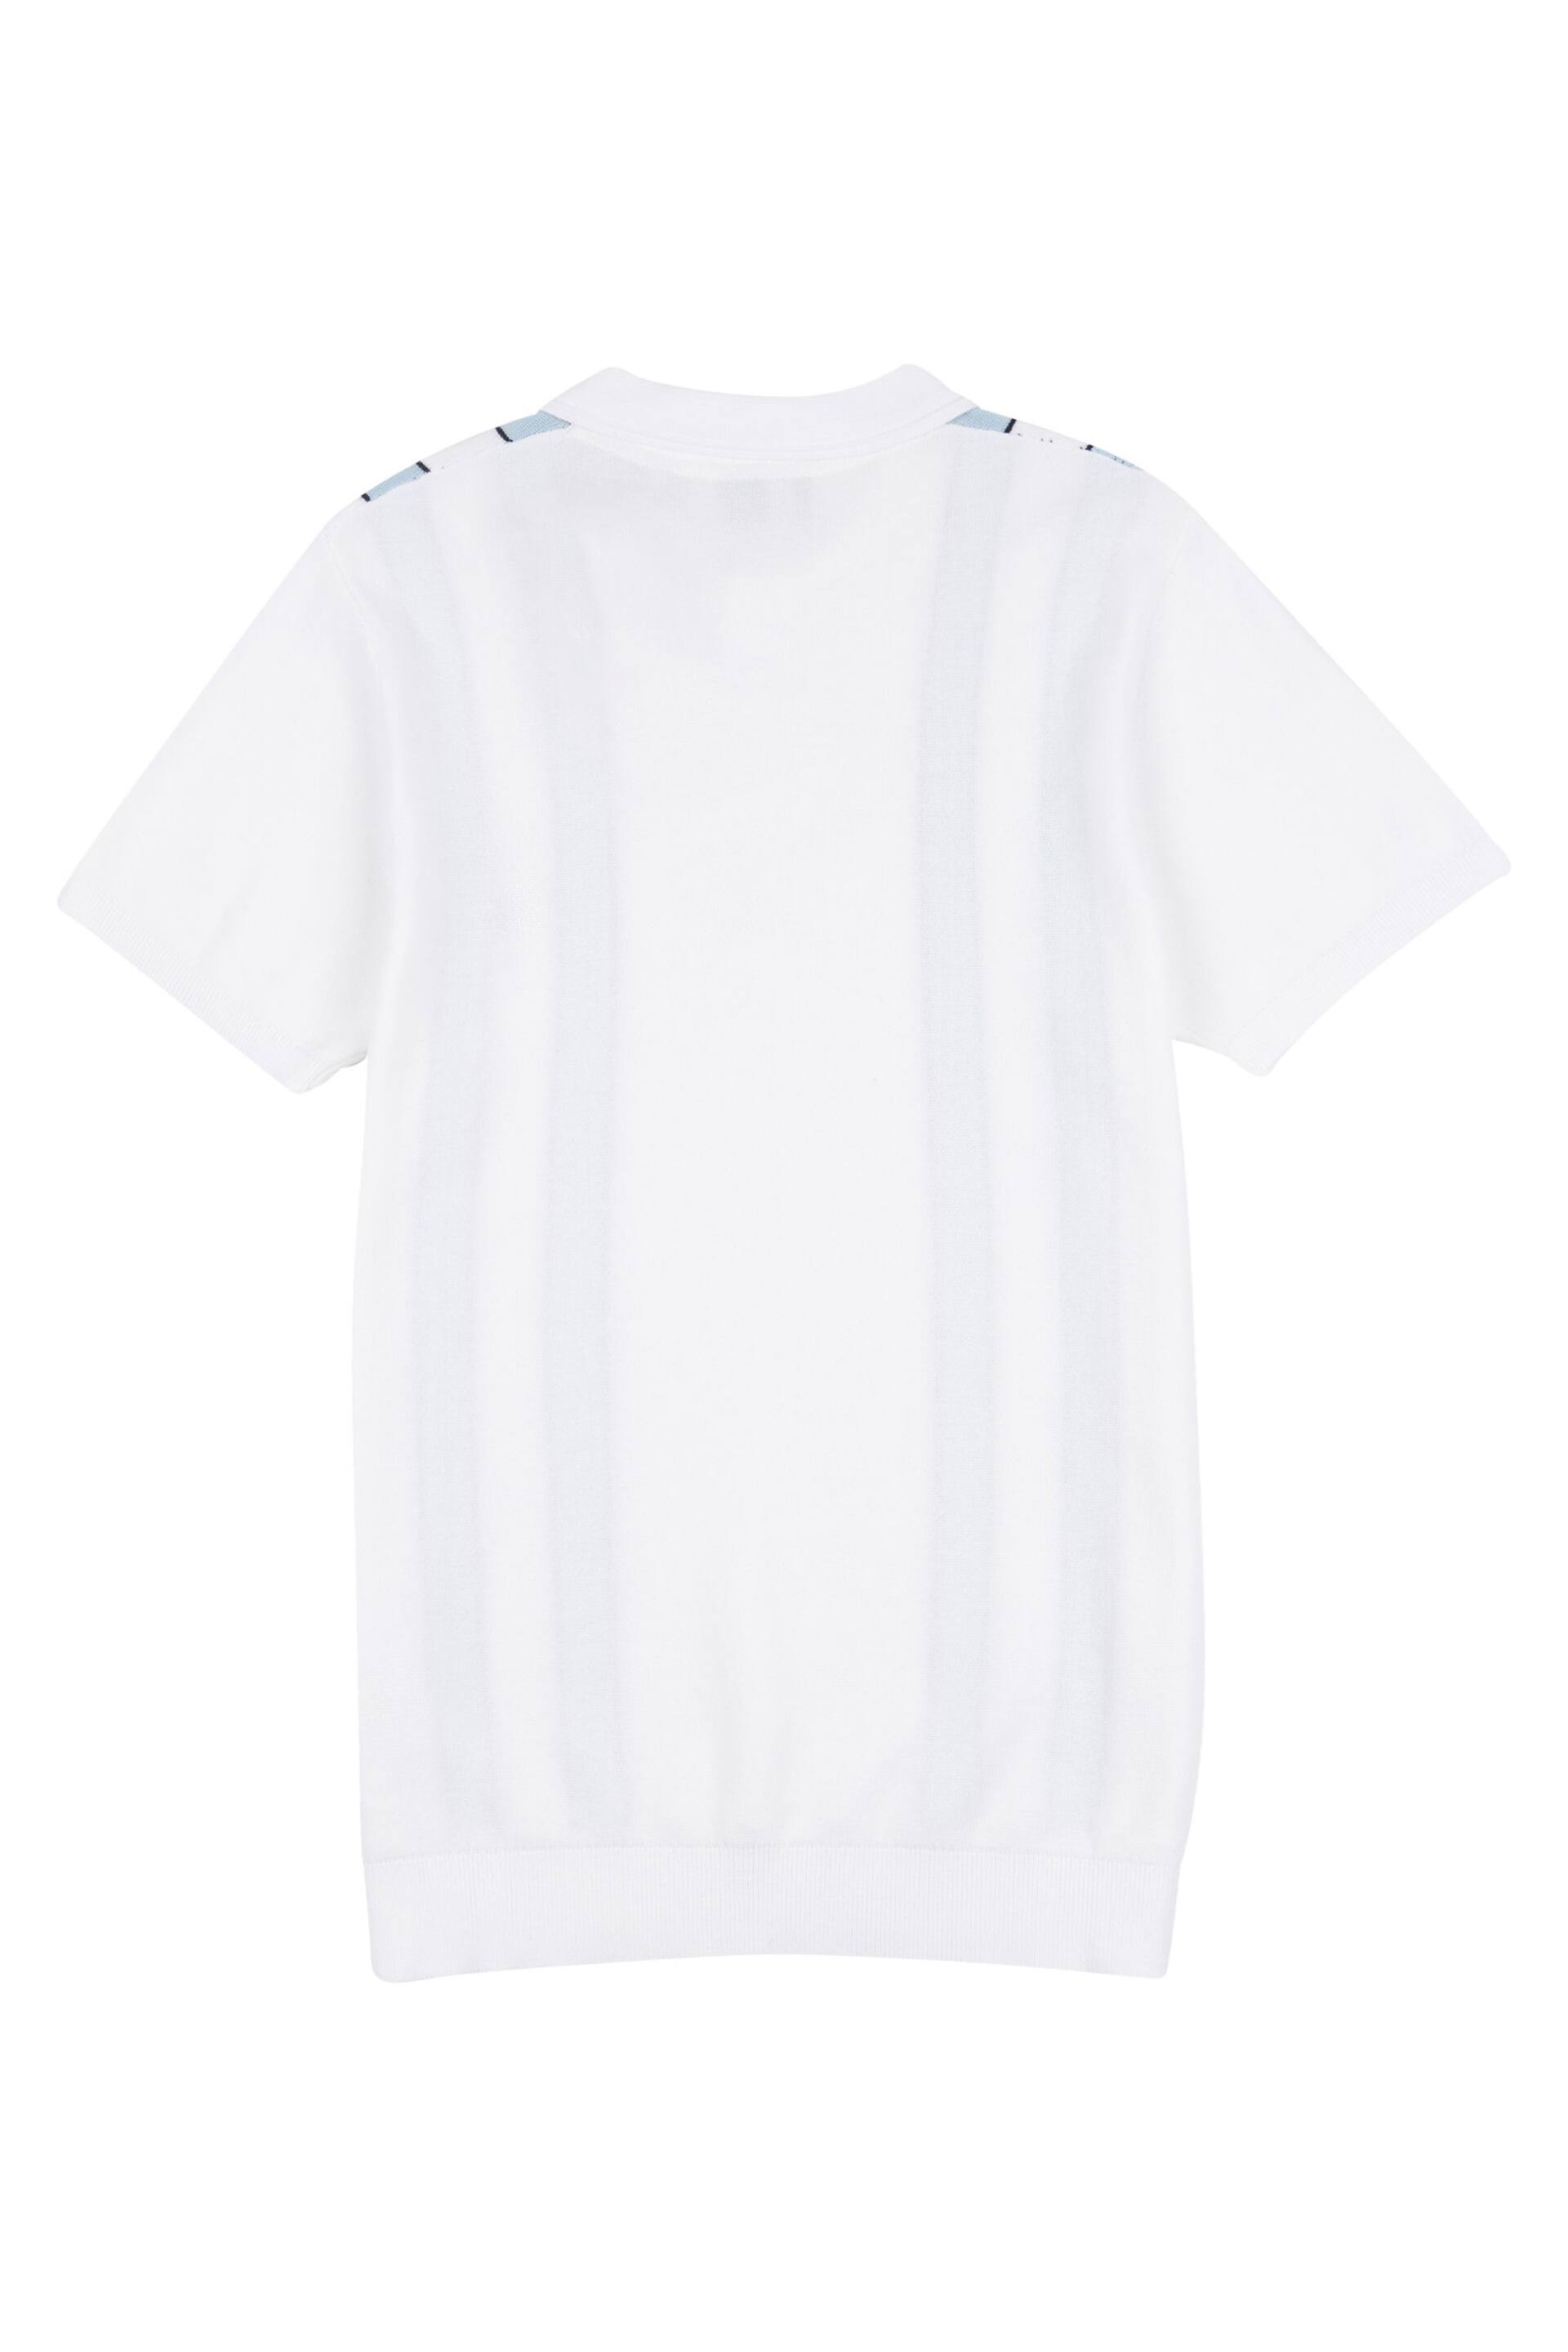 U.S. Polo Assn. Mens Regular Fit Vertical Stripe Knit White Polo Shirt - Image 6 of 7